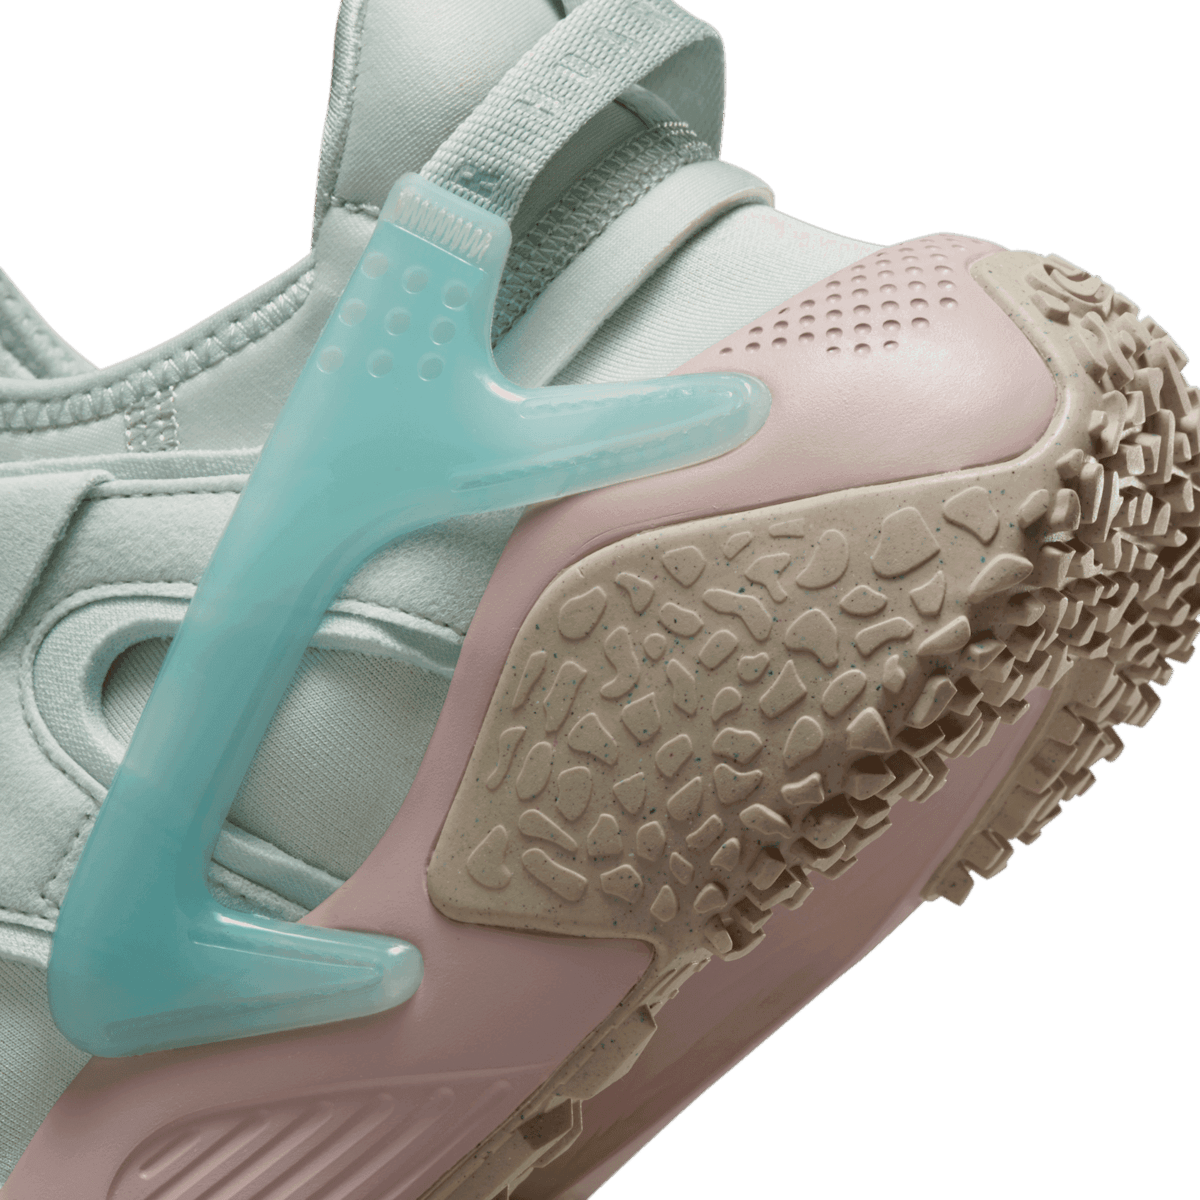 The Nike Air Huarache Craft Light Silver Citron Tint Ushers In A